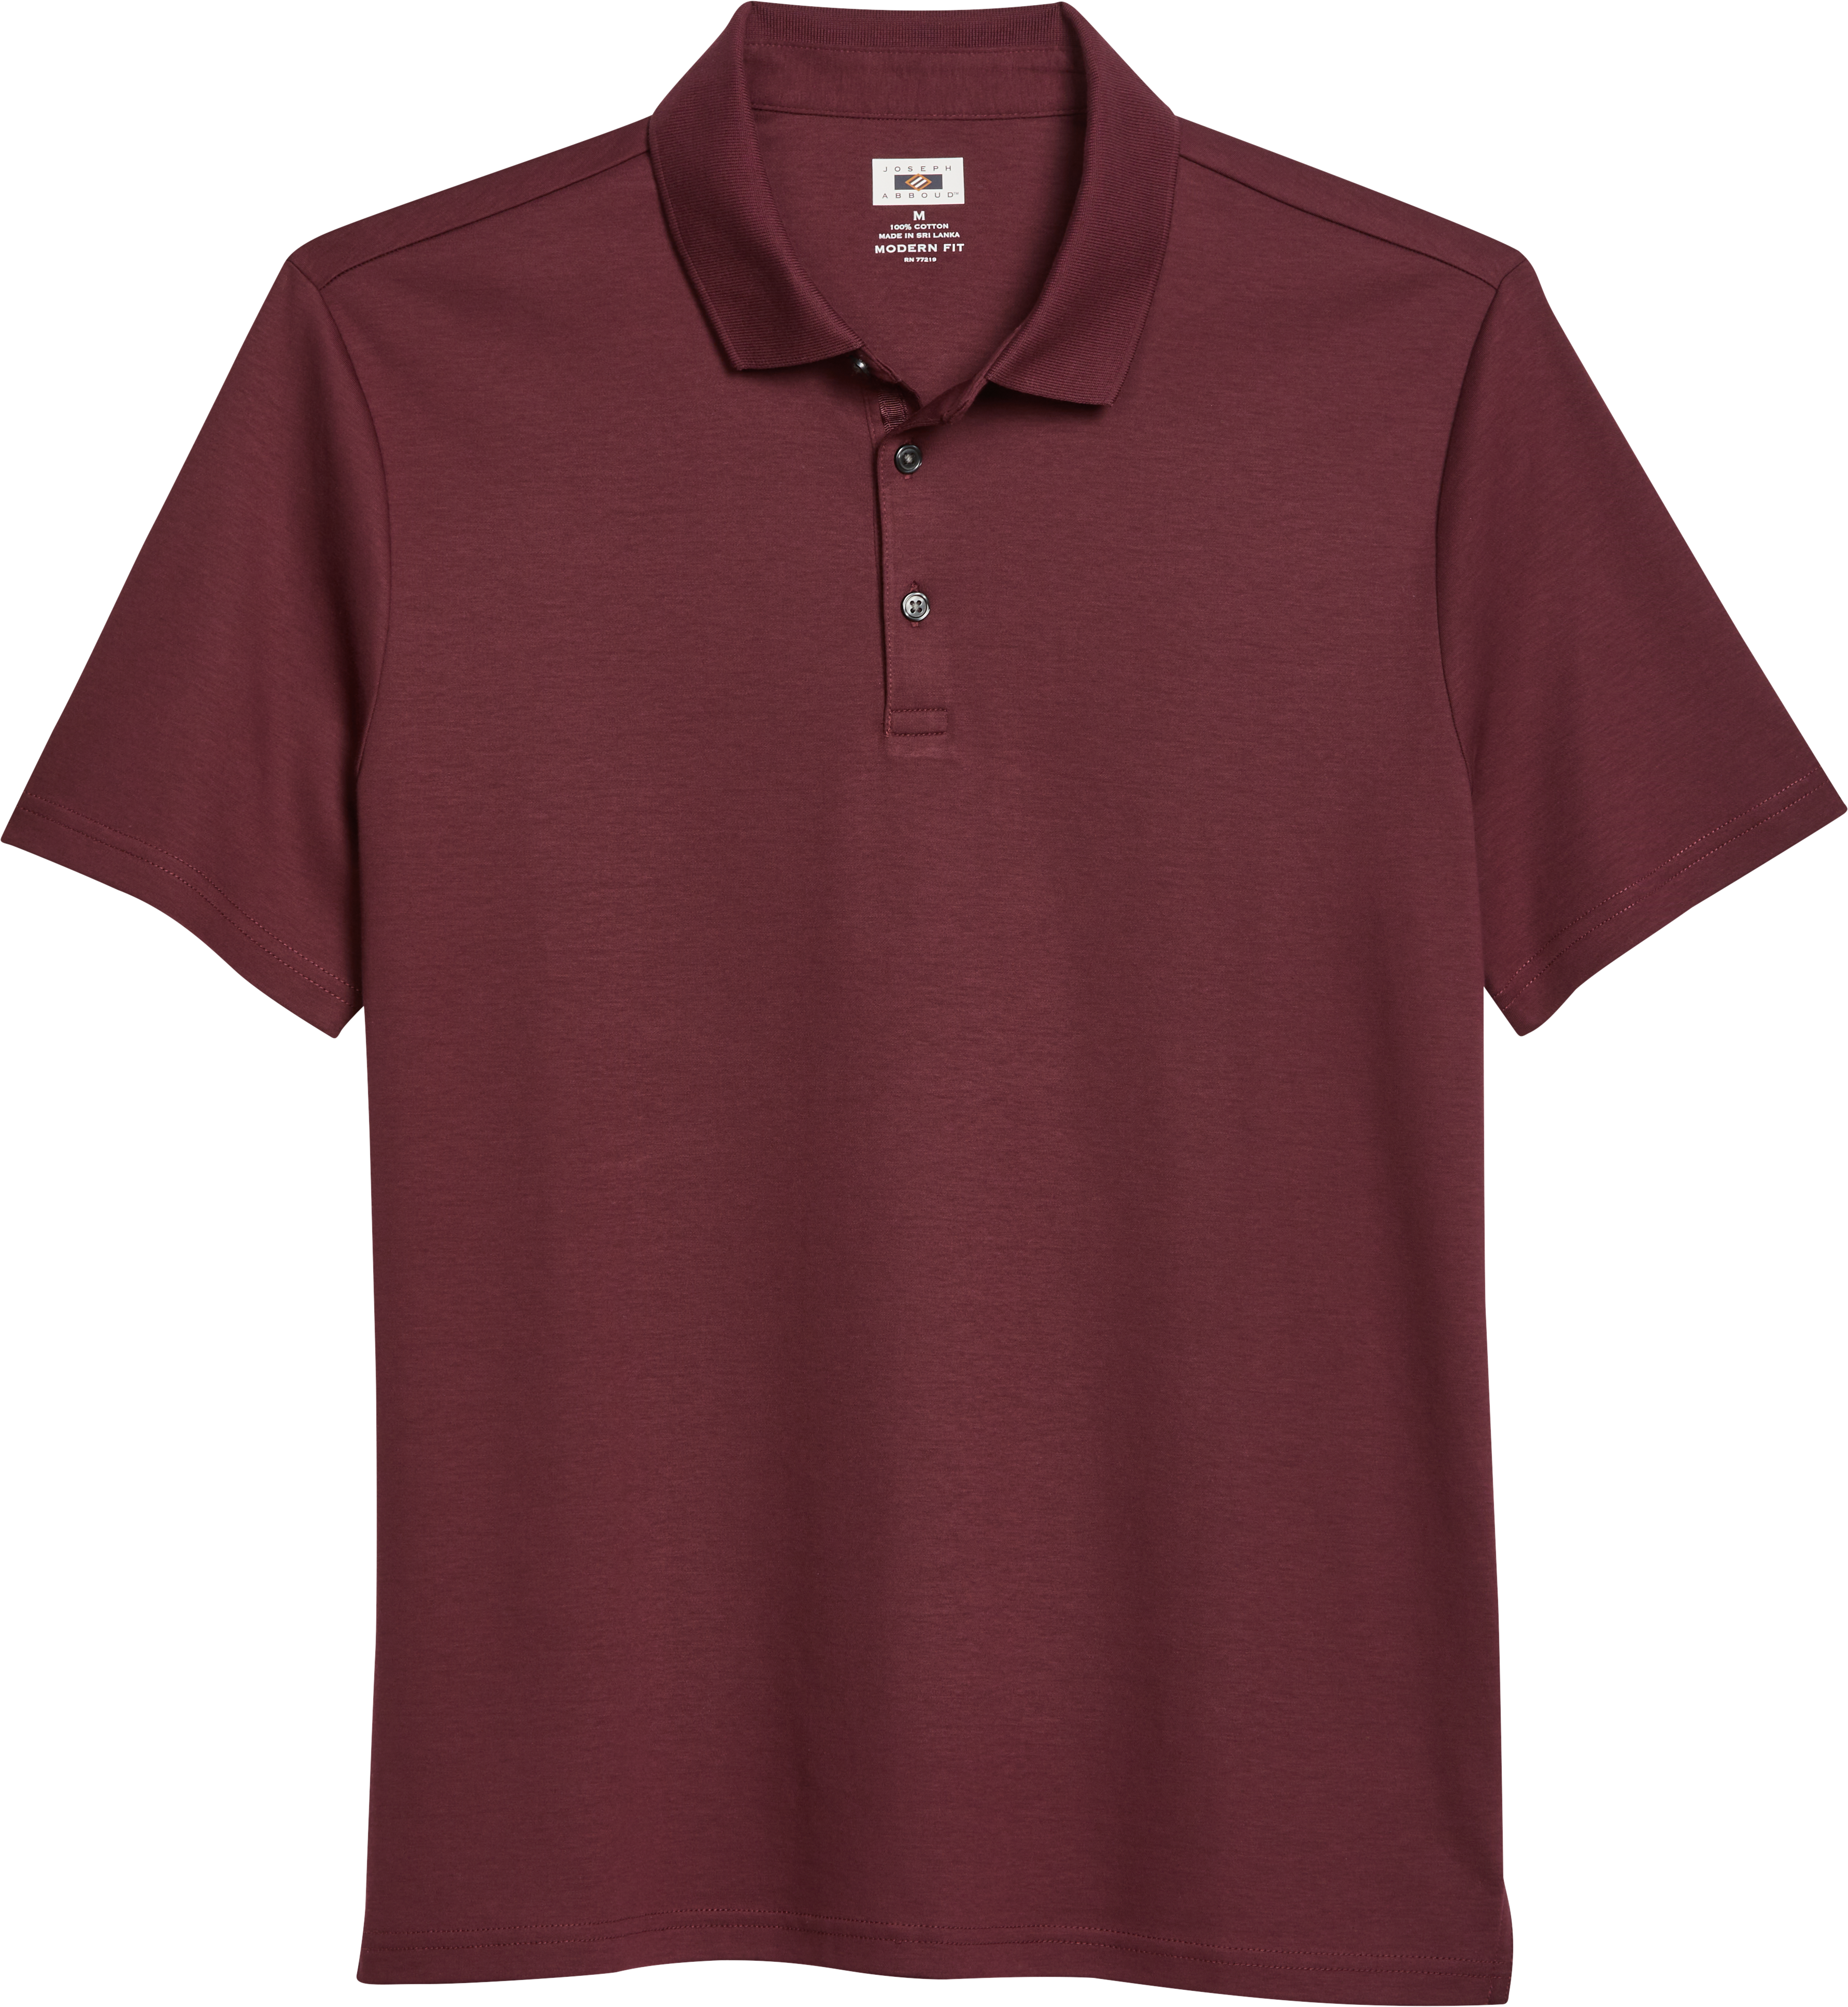 Joseph Abboud Modern Fit Short Sleeve Luxe Cotton Polo